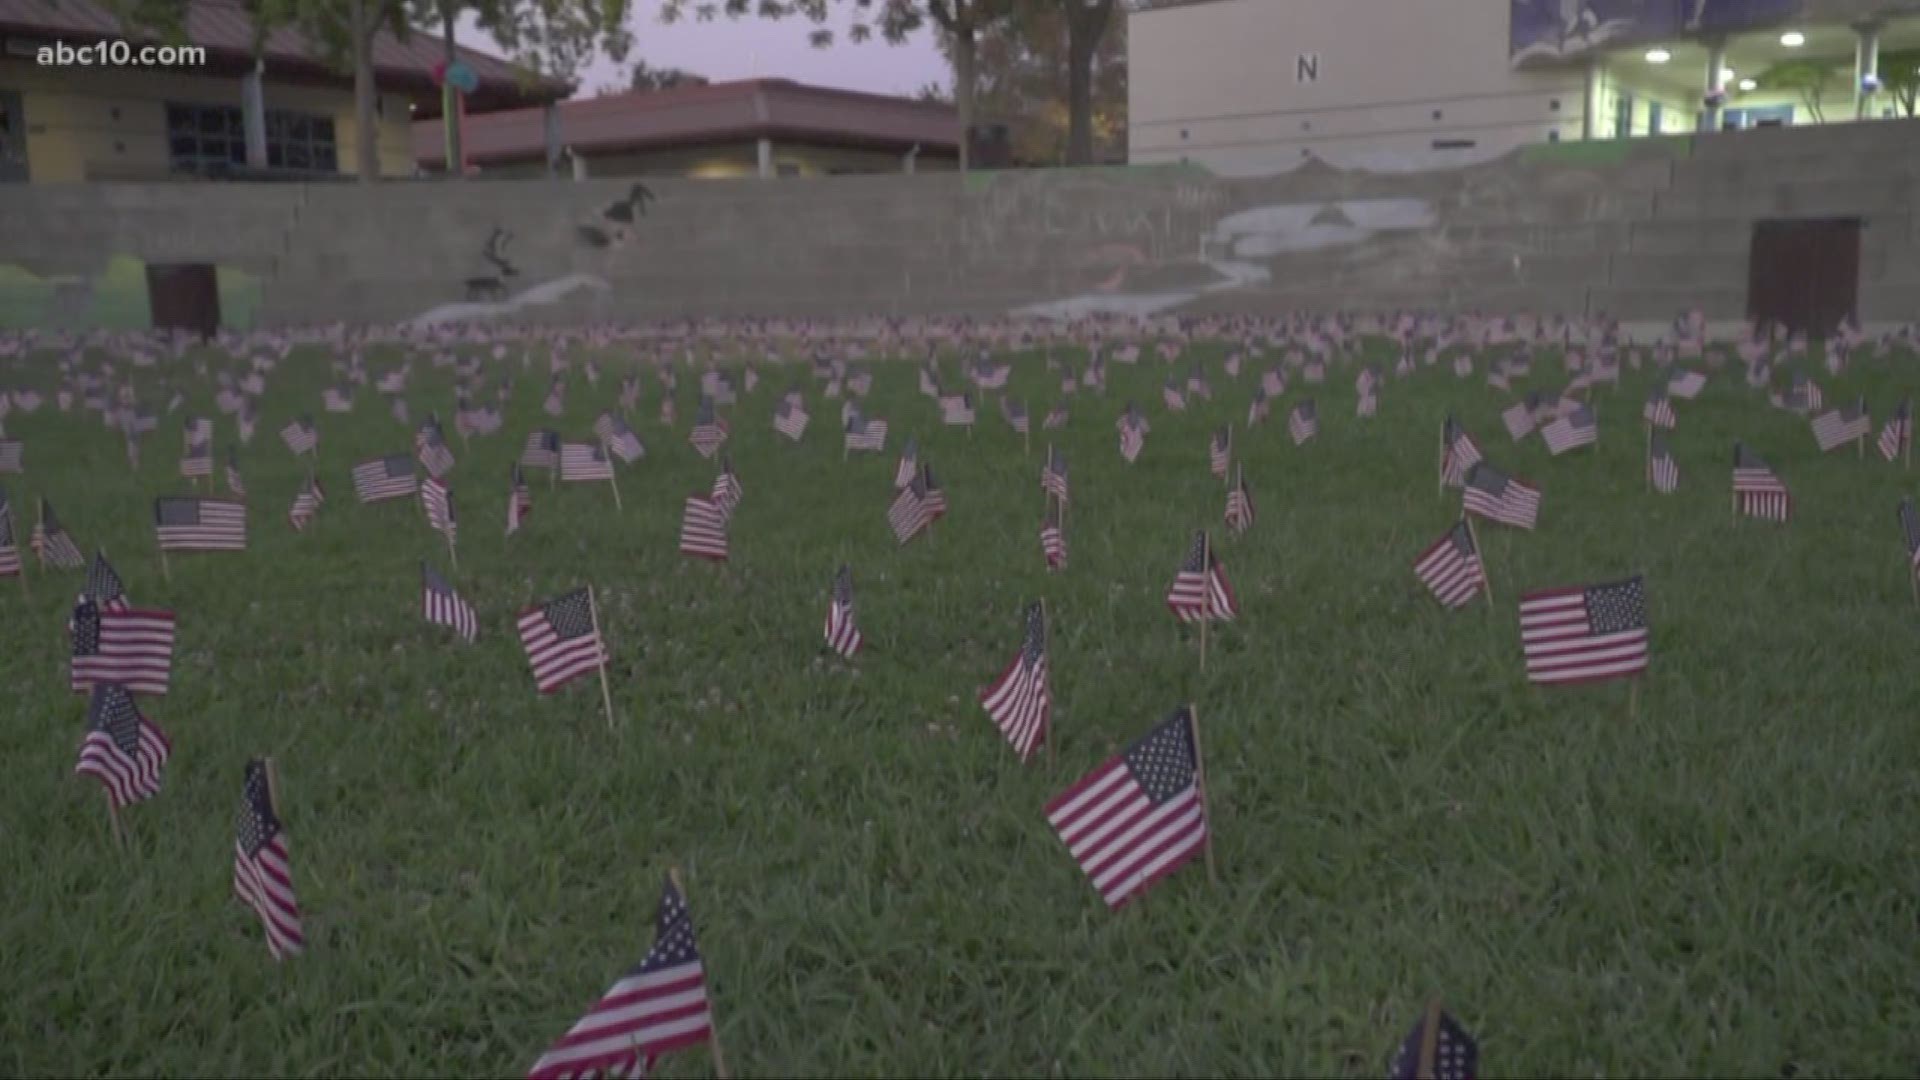 It's a day 17 years ago when some of the high schoolers weren't born. But Rocklin High School students are doing setting up a special display to remember those who were killed on 9/11.